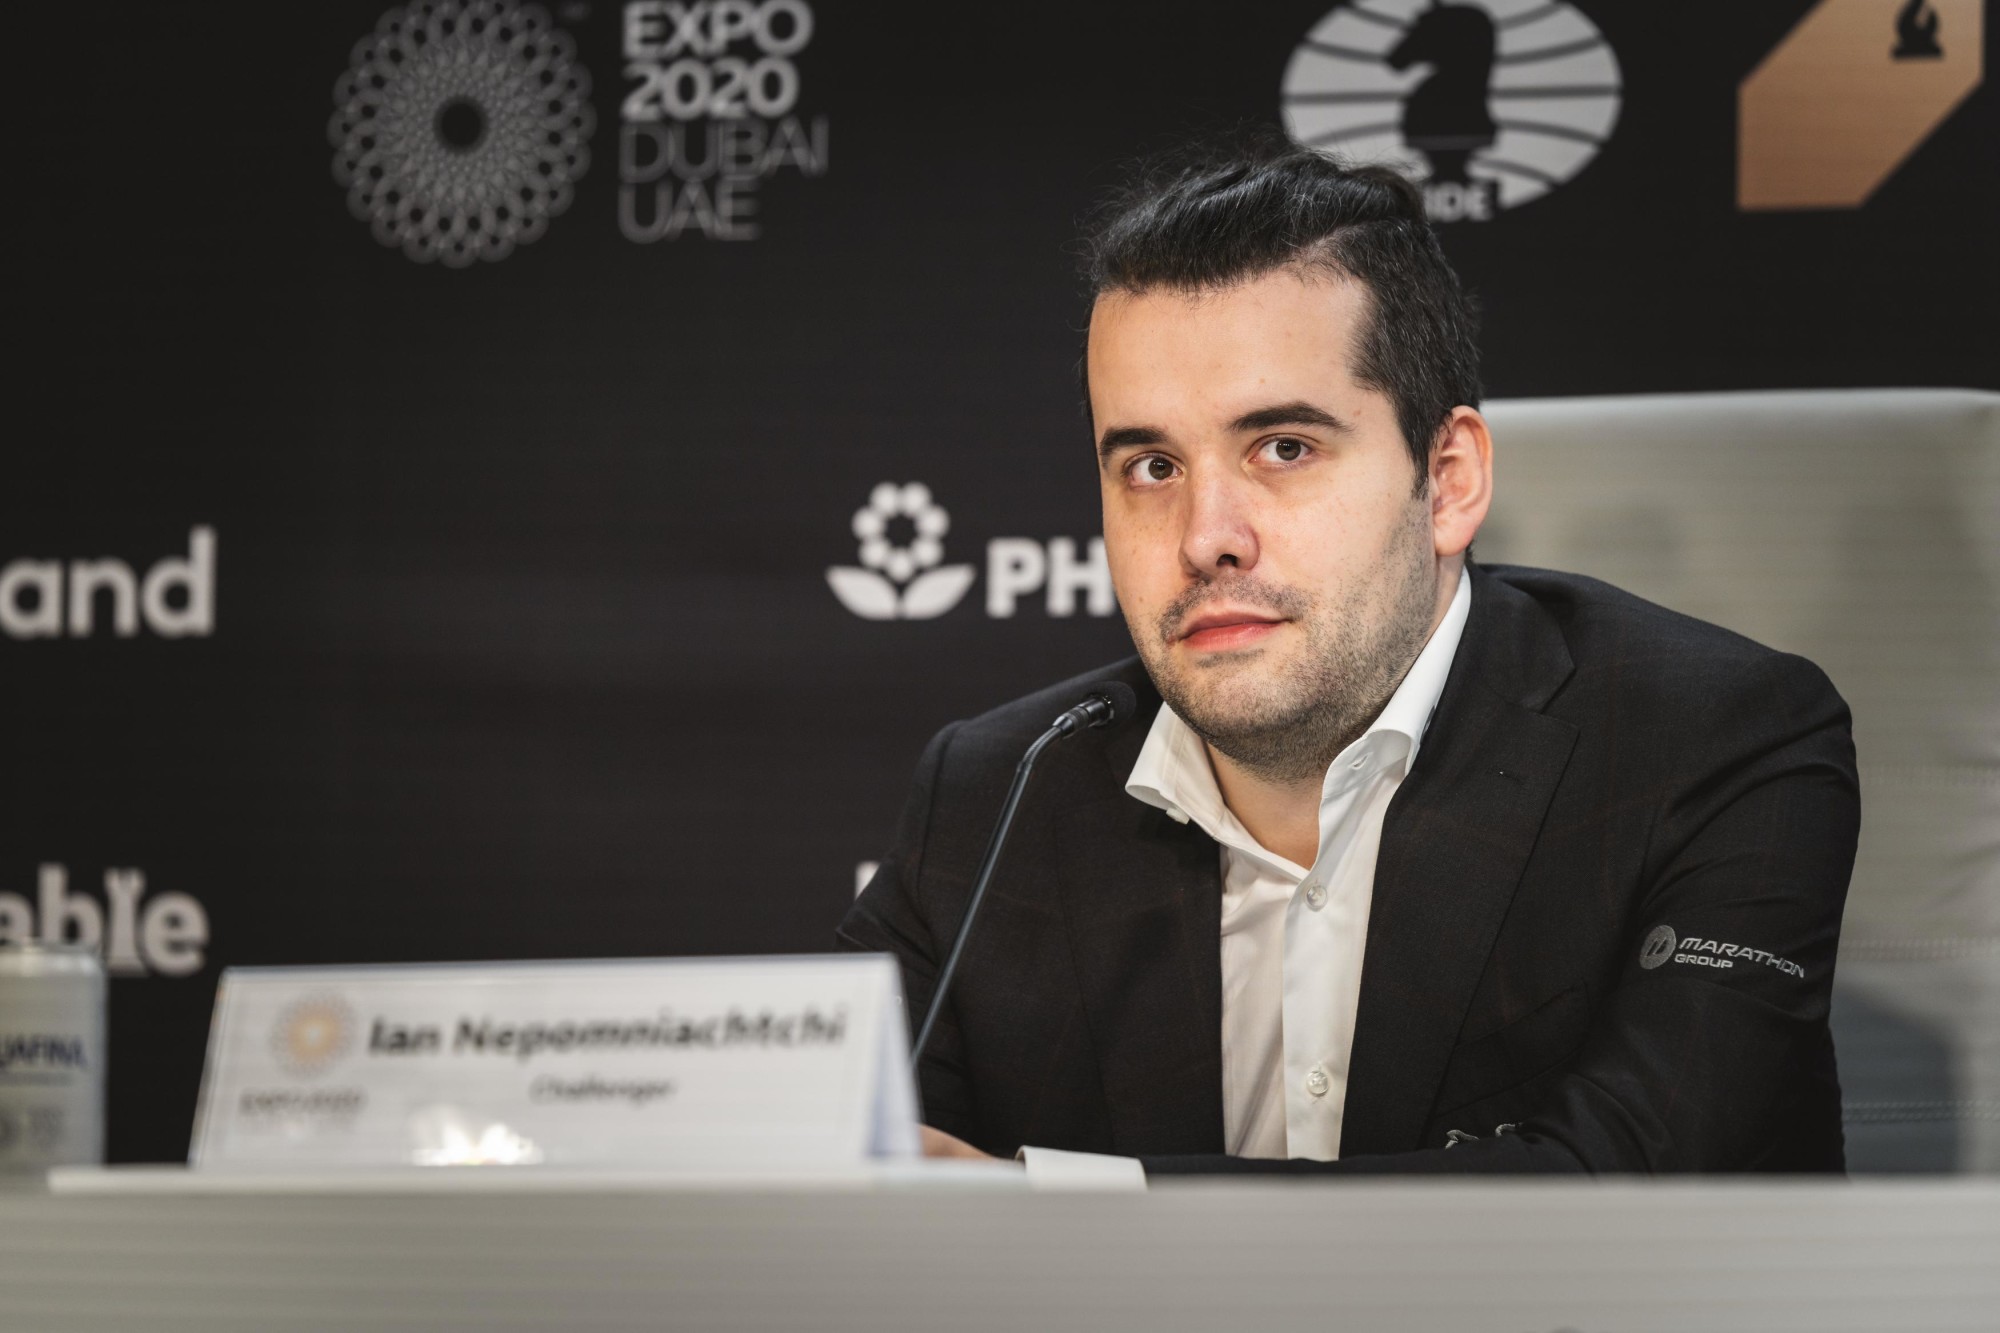 Ian Nepomniachtchi during the FIDE World Chess Championship Game 7 at Dubai Exhibition Centre (DEC) Web Image m16839